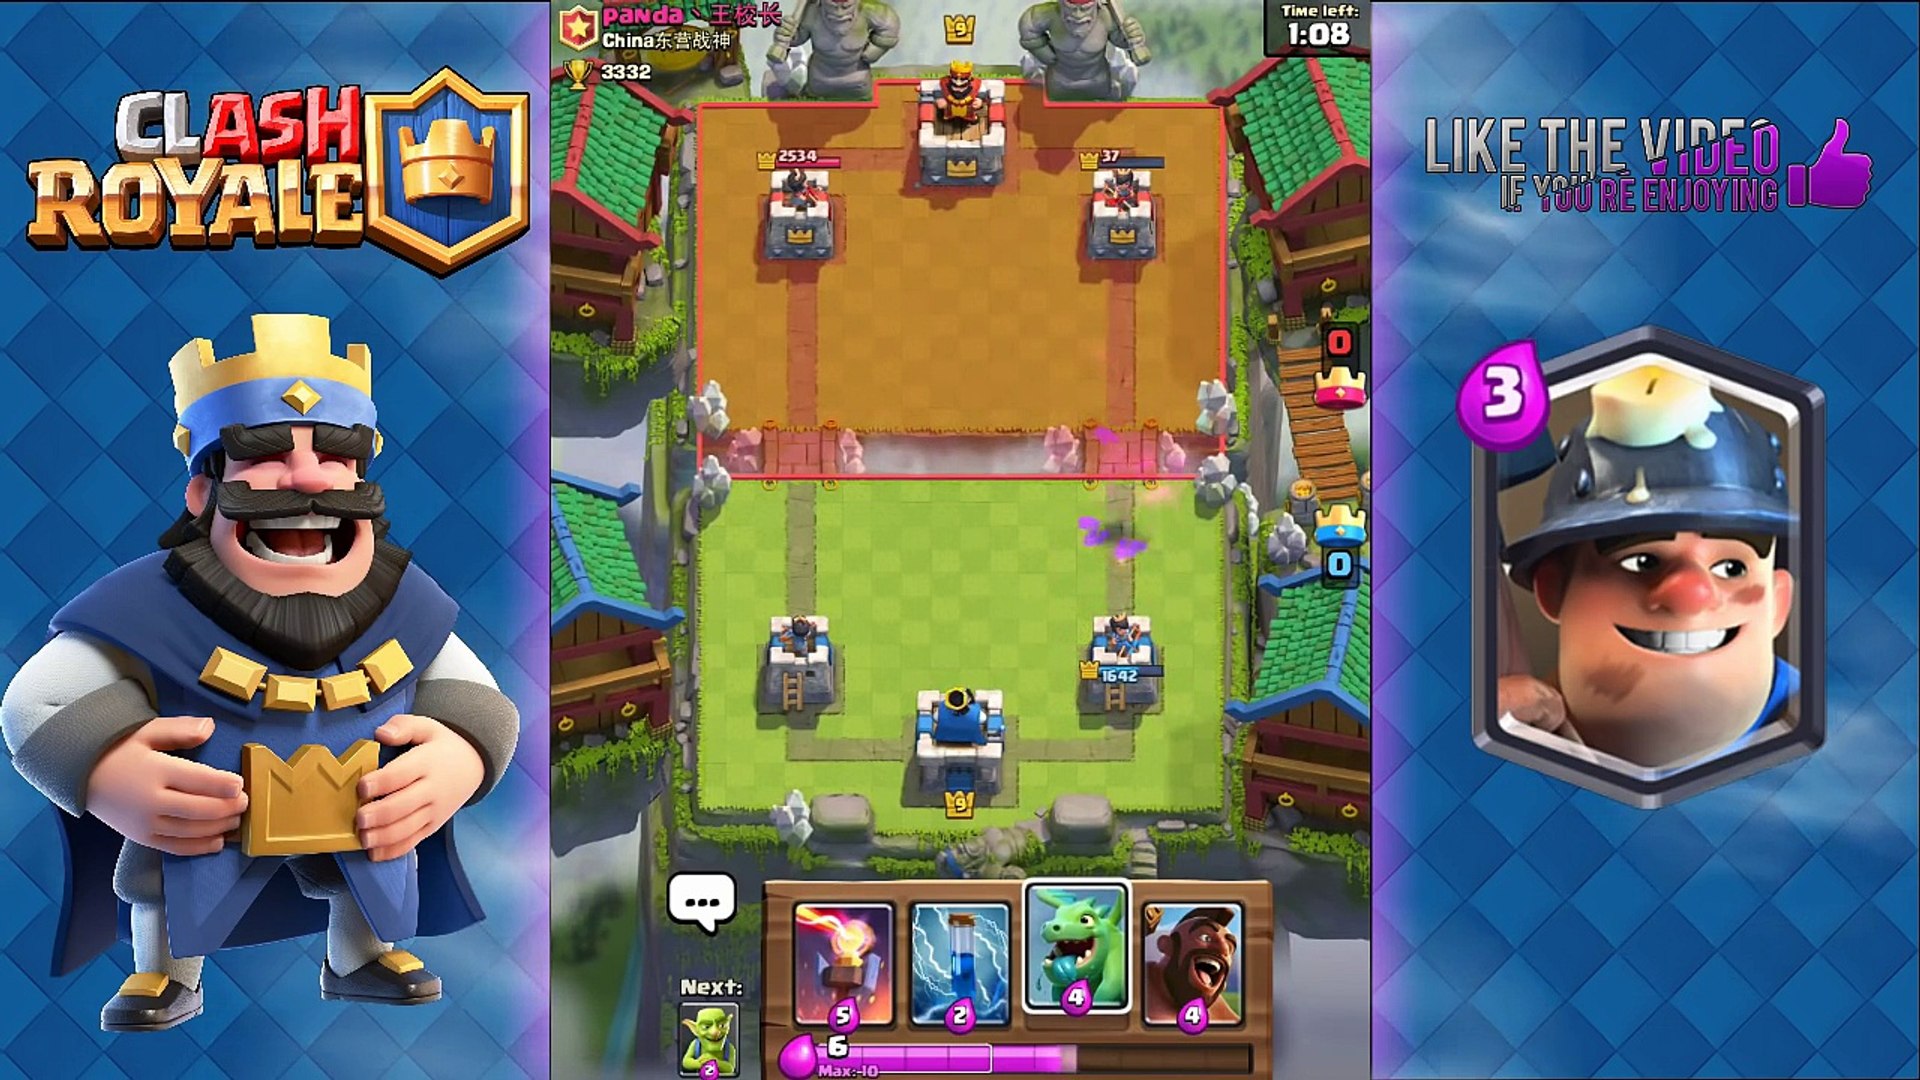 Clash Royale - Best Miner Deck and Attack Strategy for Arena 6, 7, 8 |  Miner + Hog Rider Cycle Deck - Vídeo Dailymotion